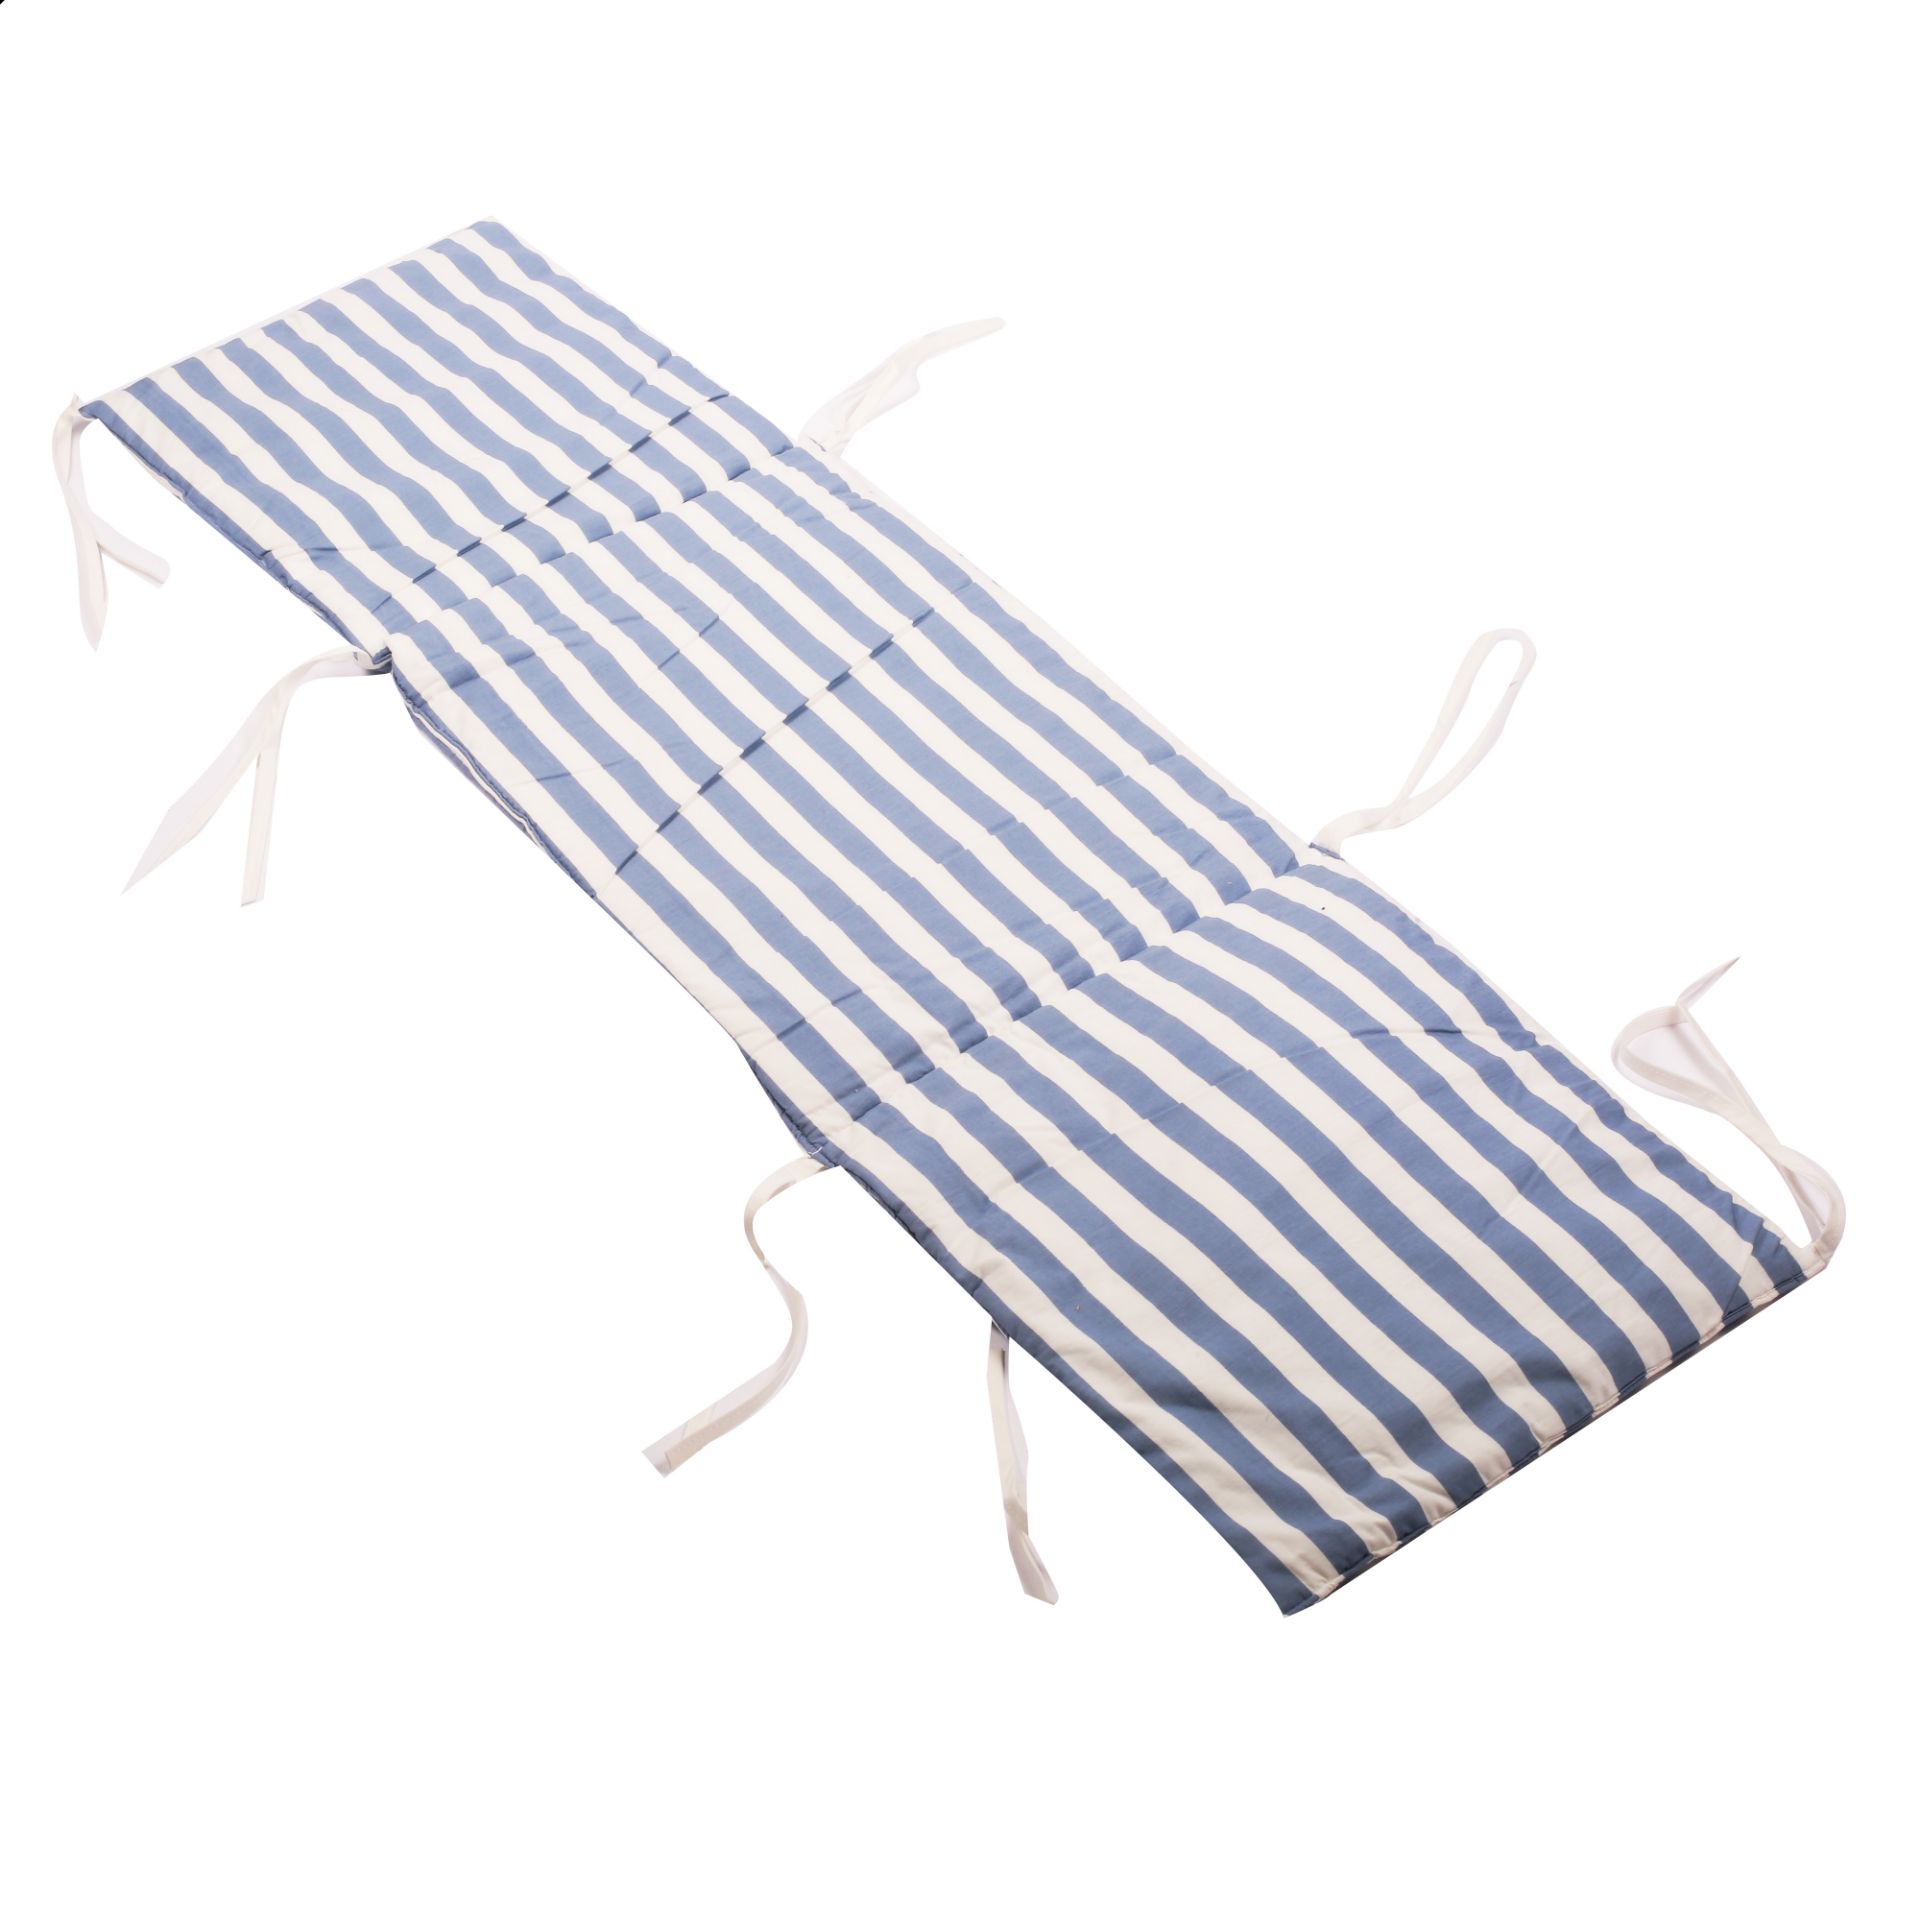 36 Baby Padded Cot Liners | Crib Rail Cover One-Piece Bumper Cot Bumper (RRP 29.99 Each) - Image 13 of 17